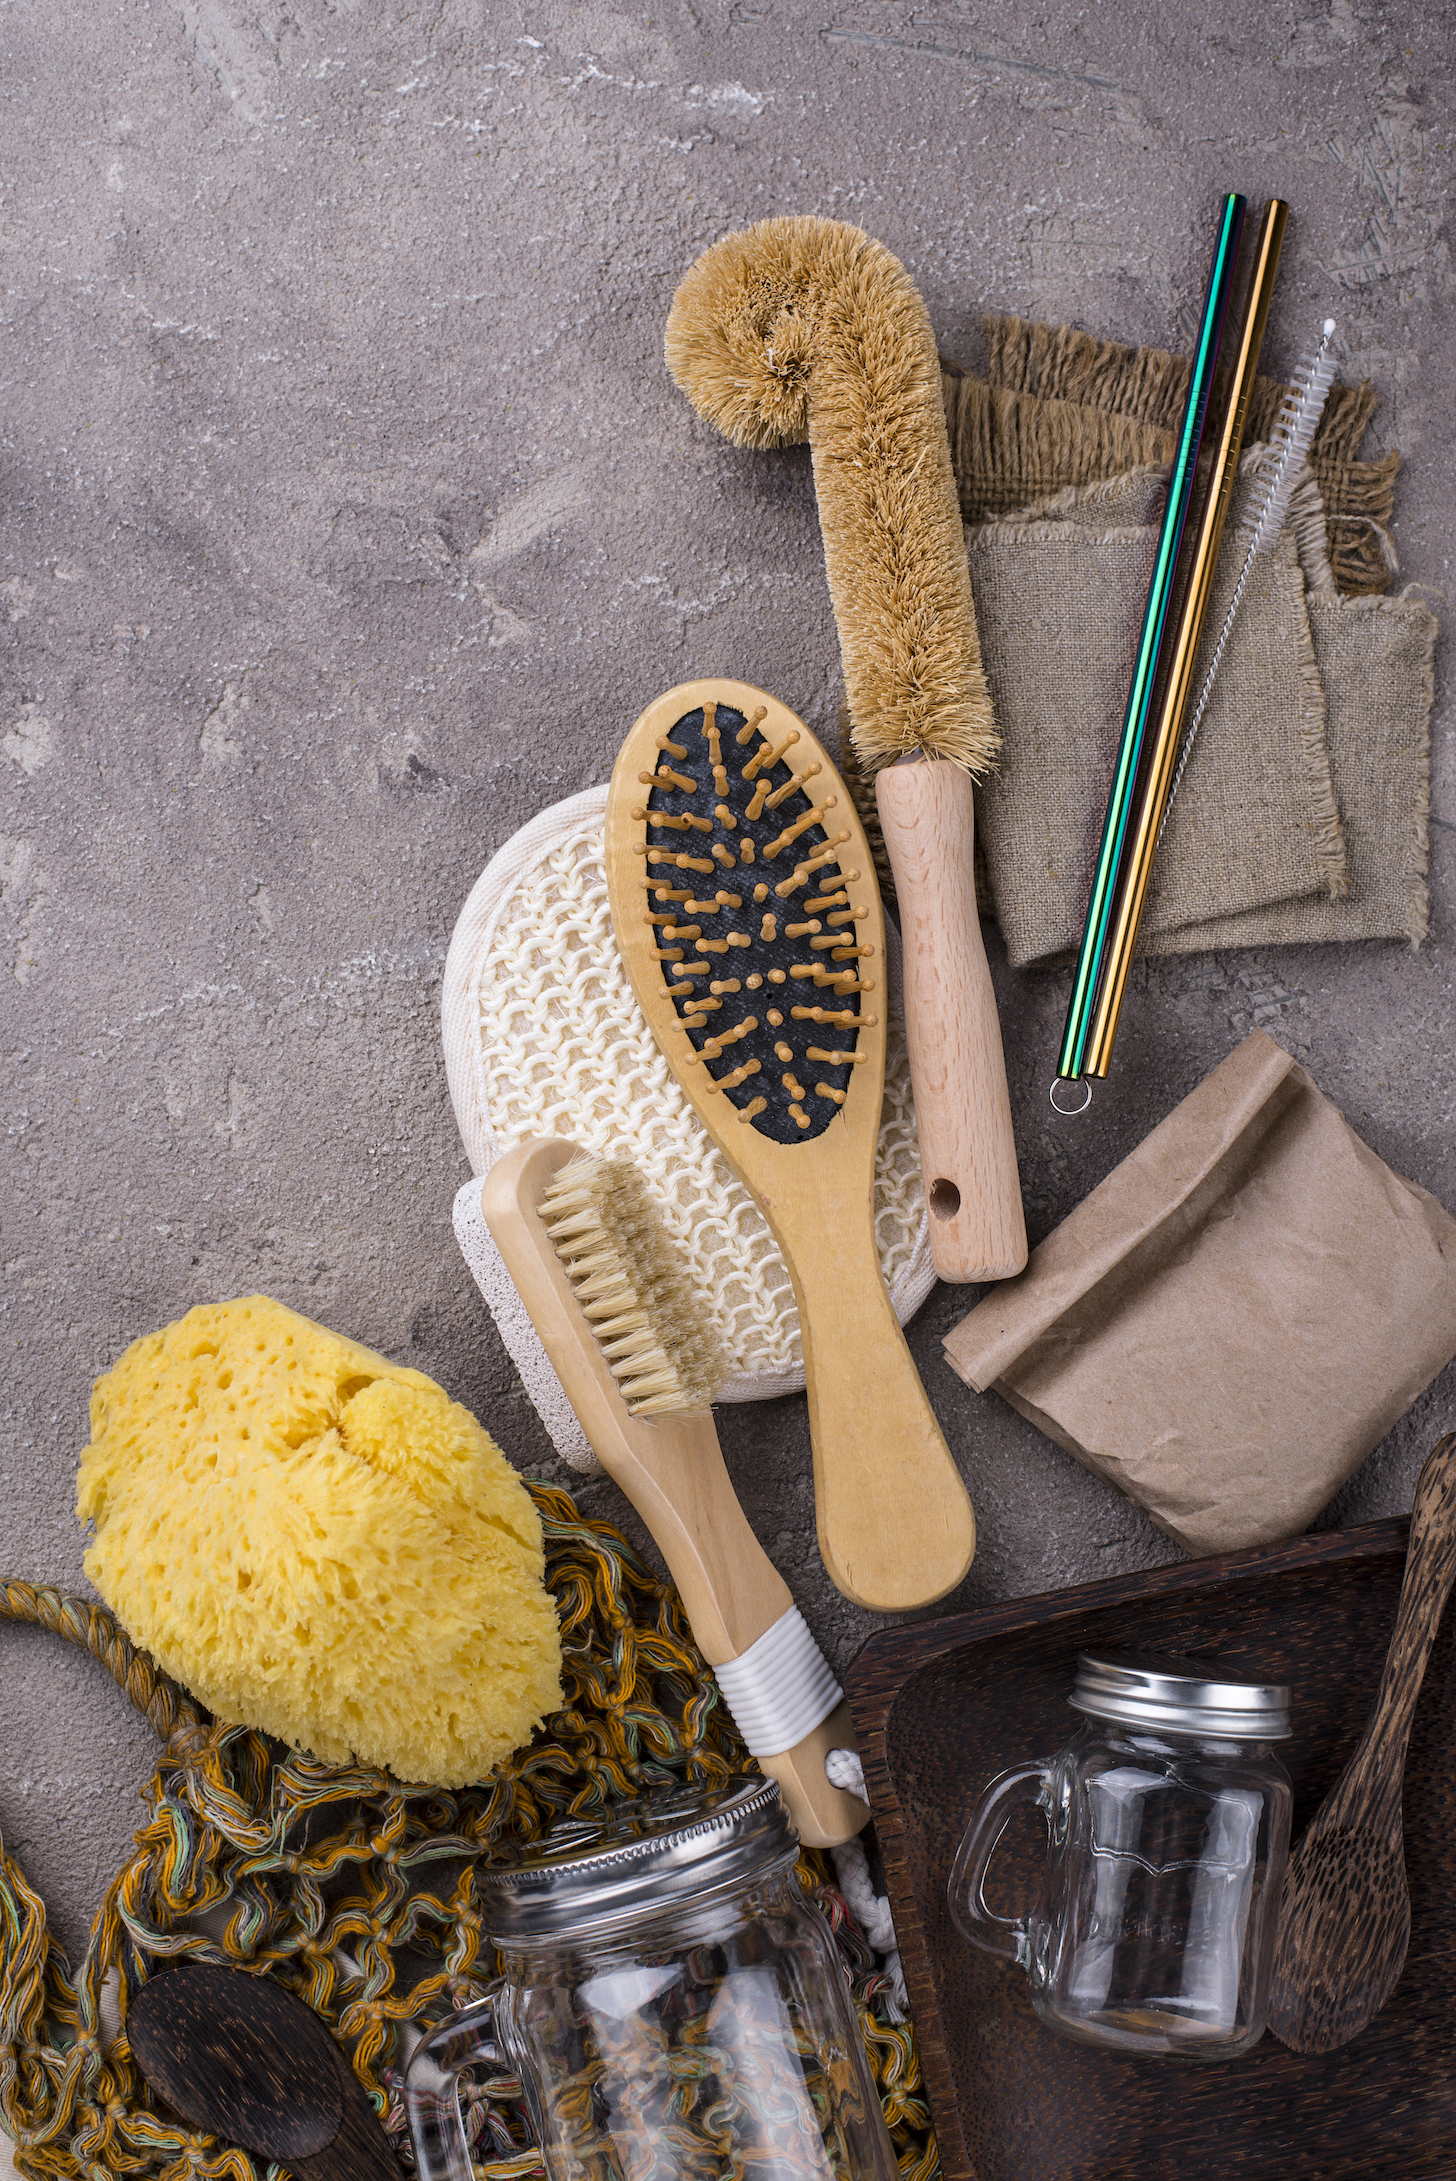 Eco-friendly home accessories for zero waste living. Soap, glass jar, comb, brush, washcloth, wicker bag, coconut tableware.